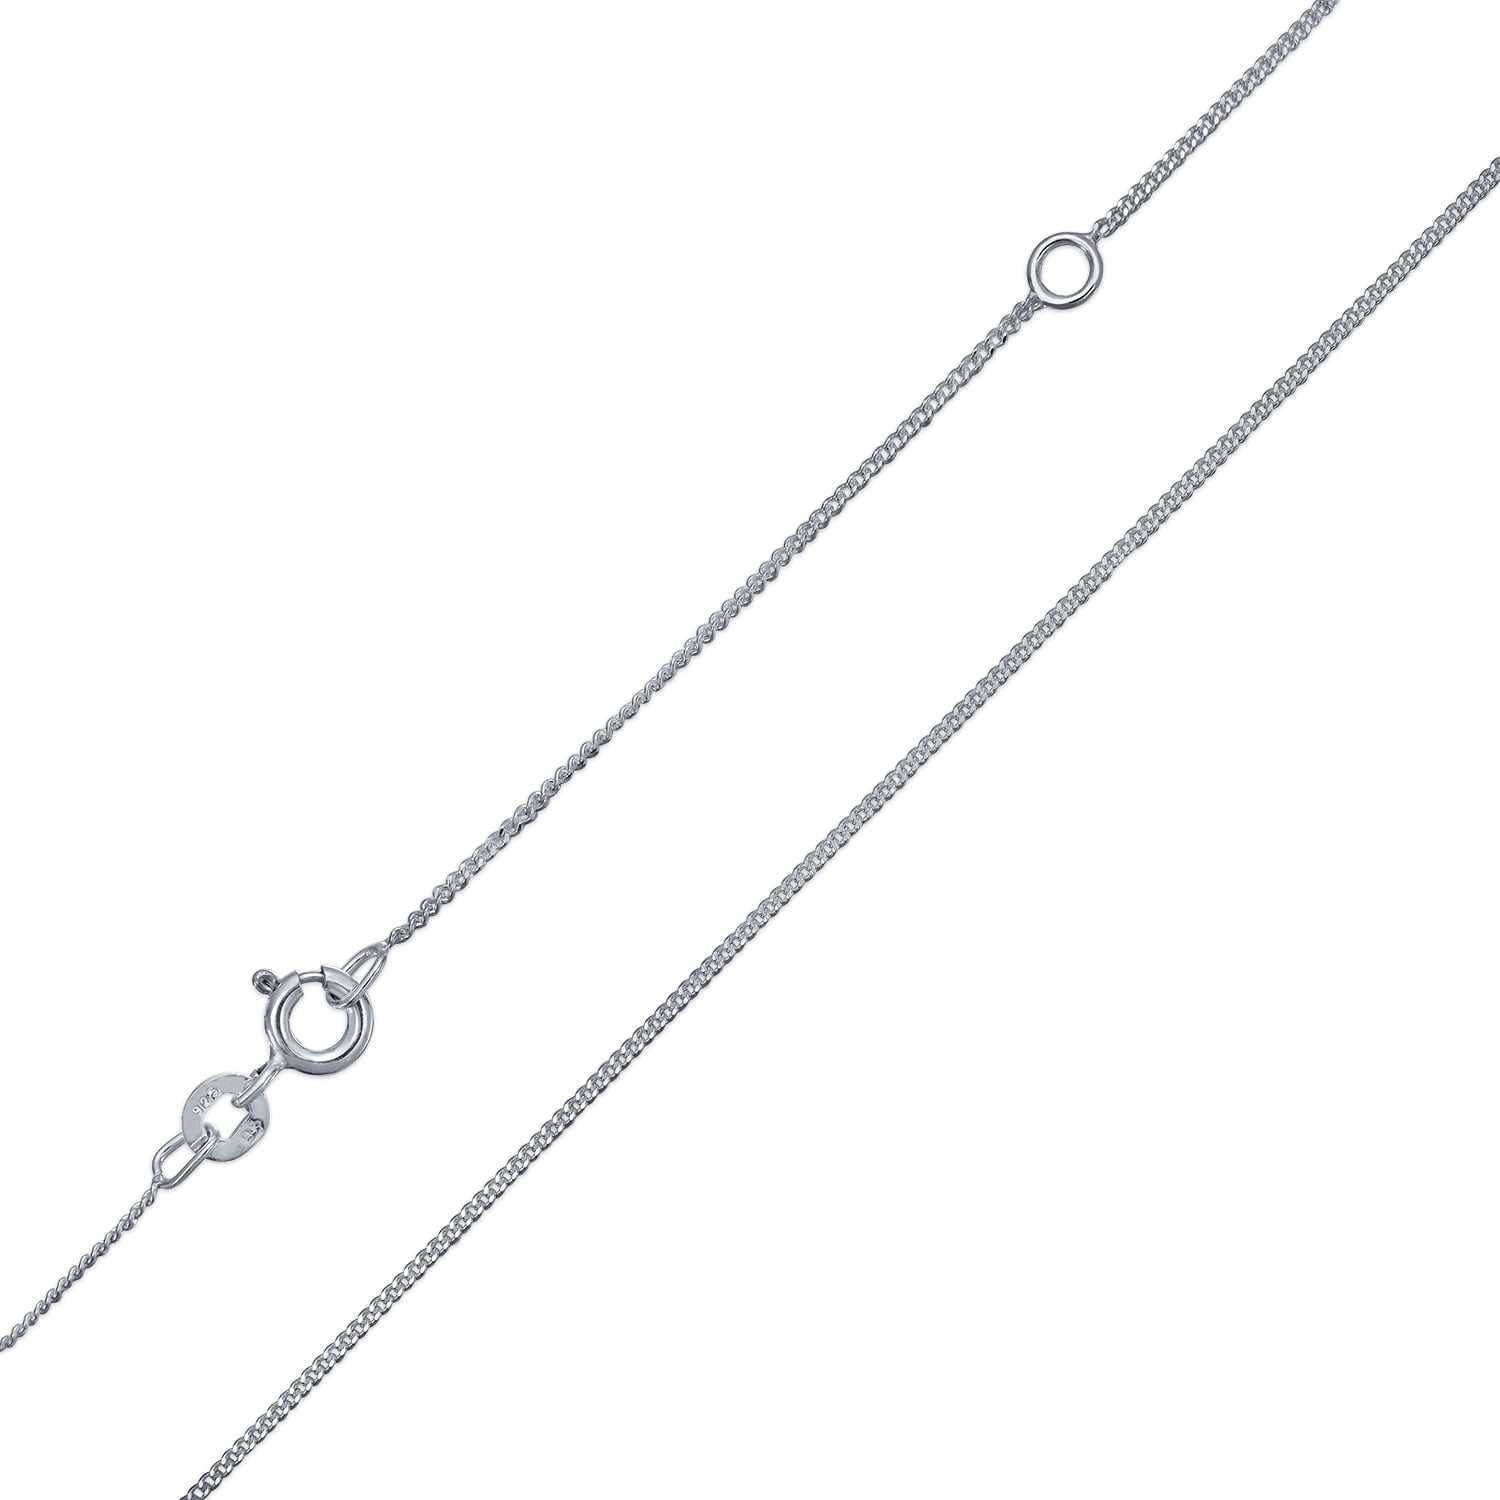 Very Thin Box Link Chain 1 mm 010 Gauge For Women Necklace 925 Sterling Silver Made In Italy 